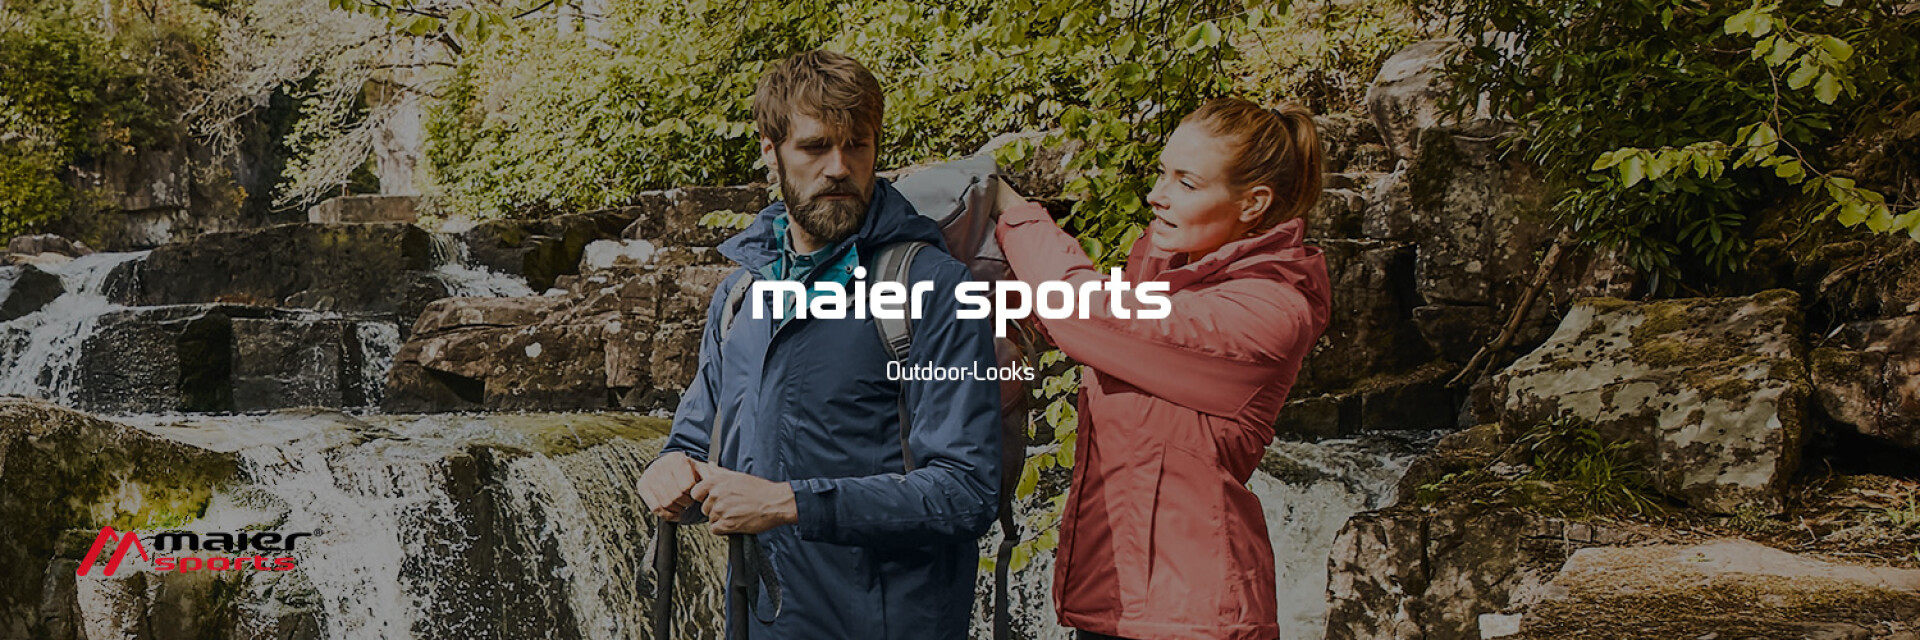 Maier Sports Outdoor-Looks